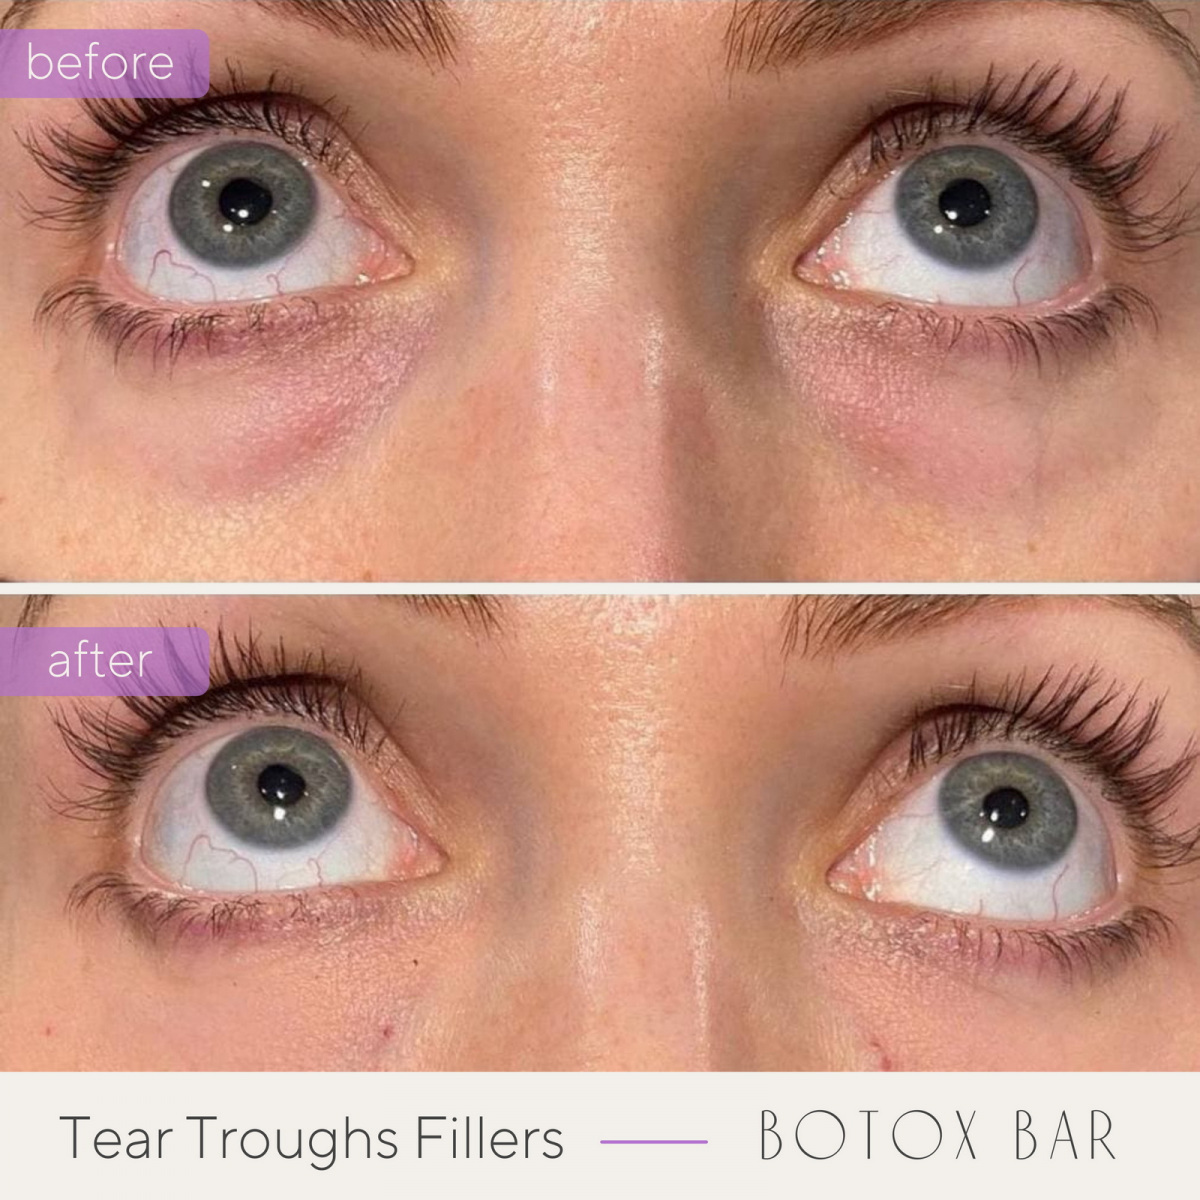 Before and After Tear Trough Fillers in The Botox Bar and Aesthetics at Dallas & Sherman, TX